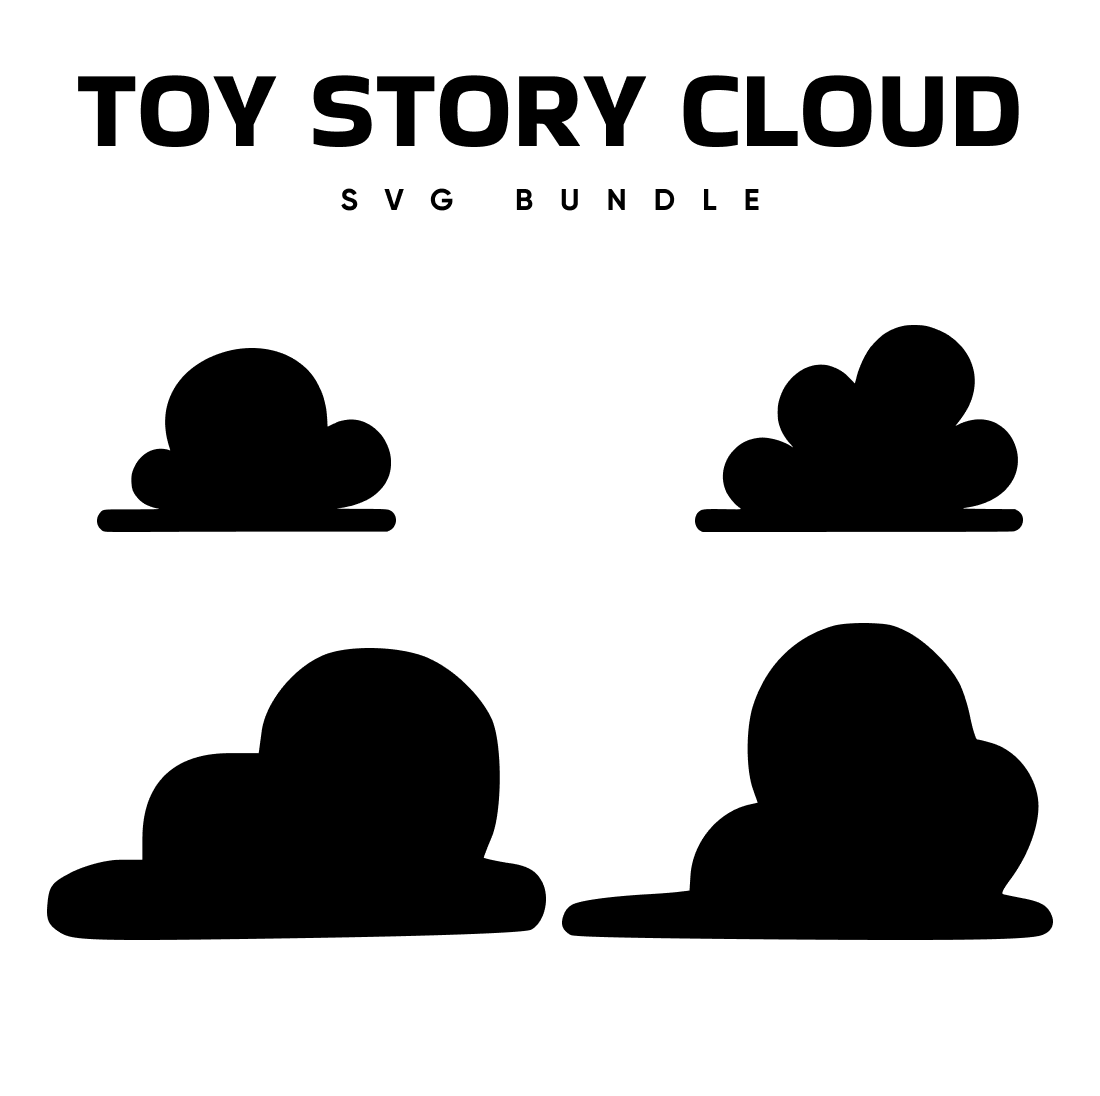 toy story cloud svg.